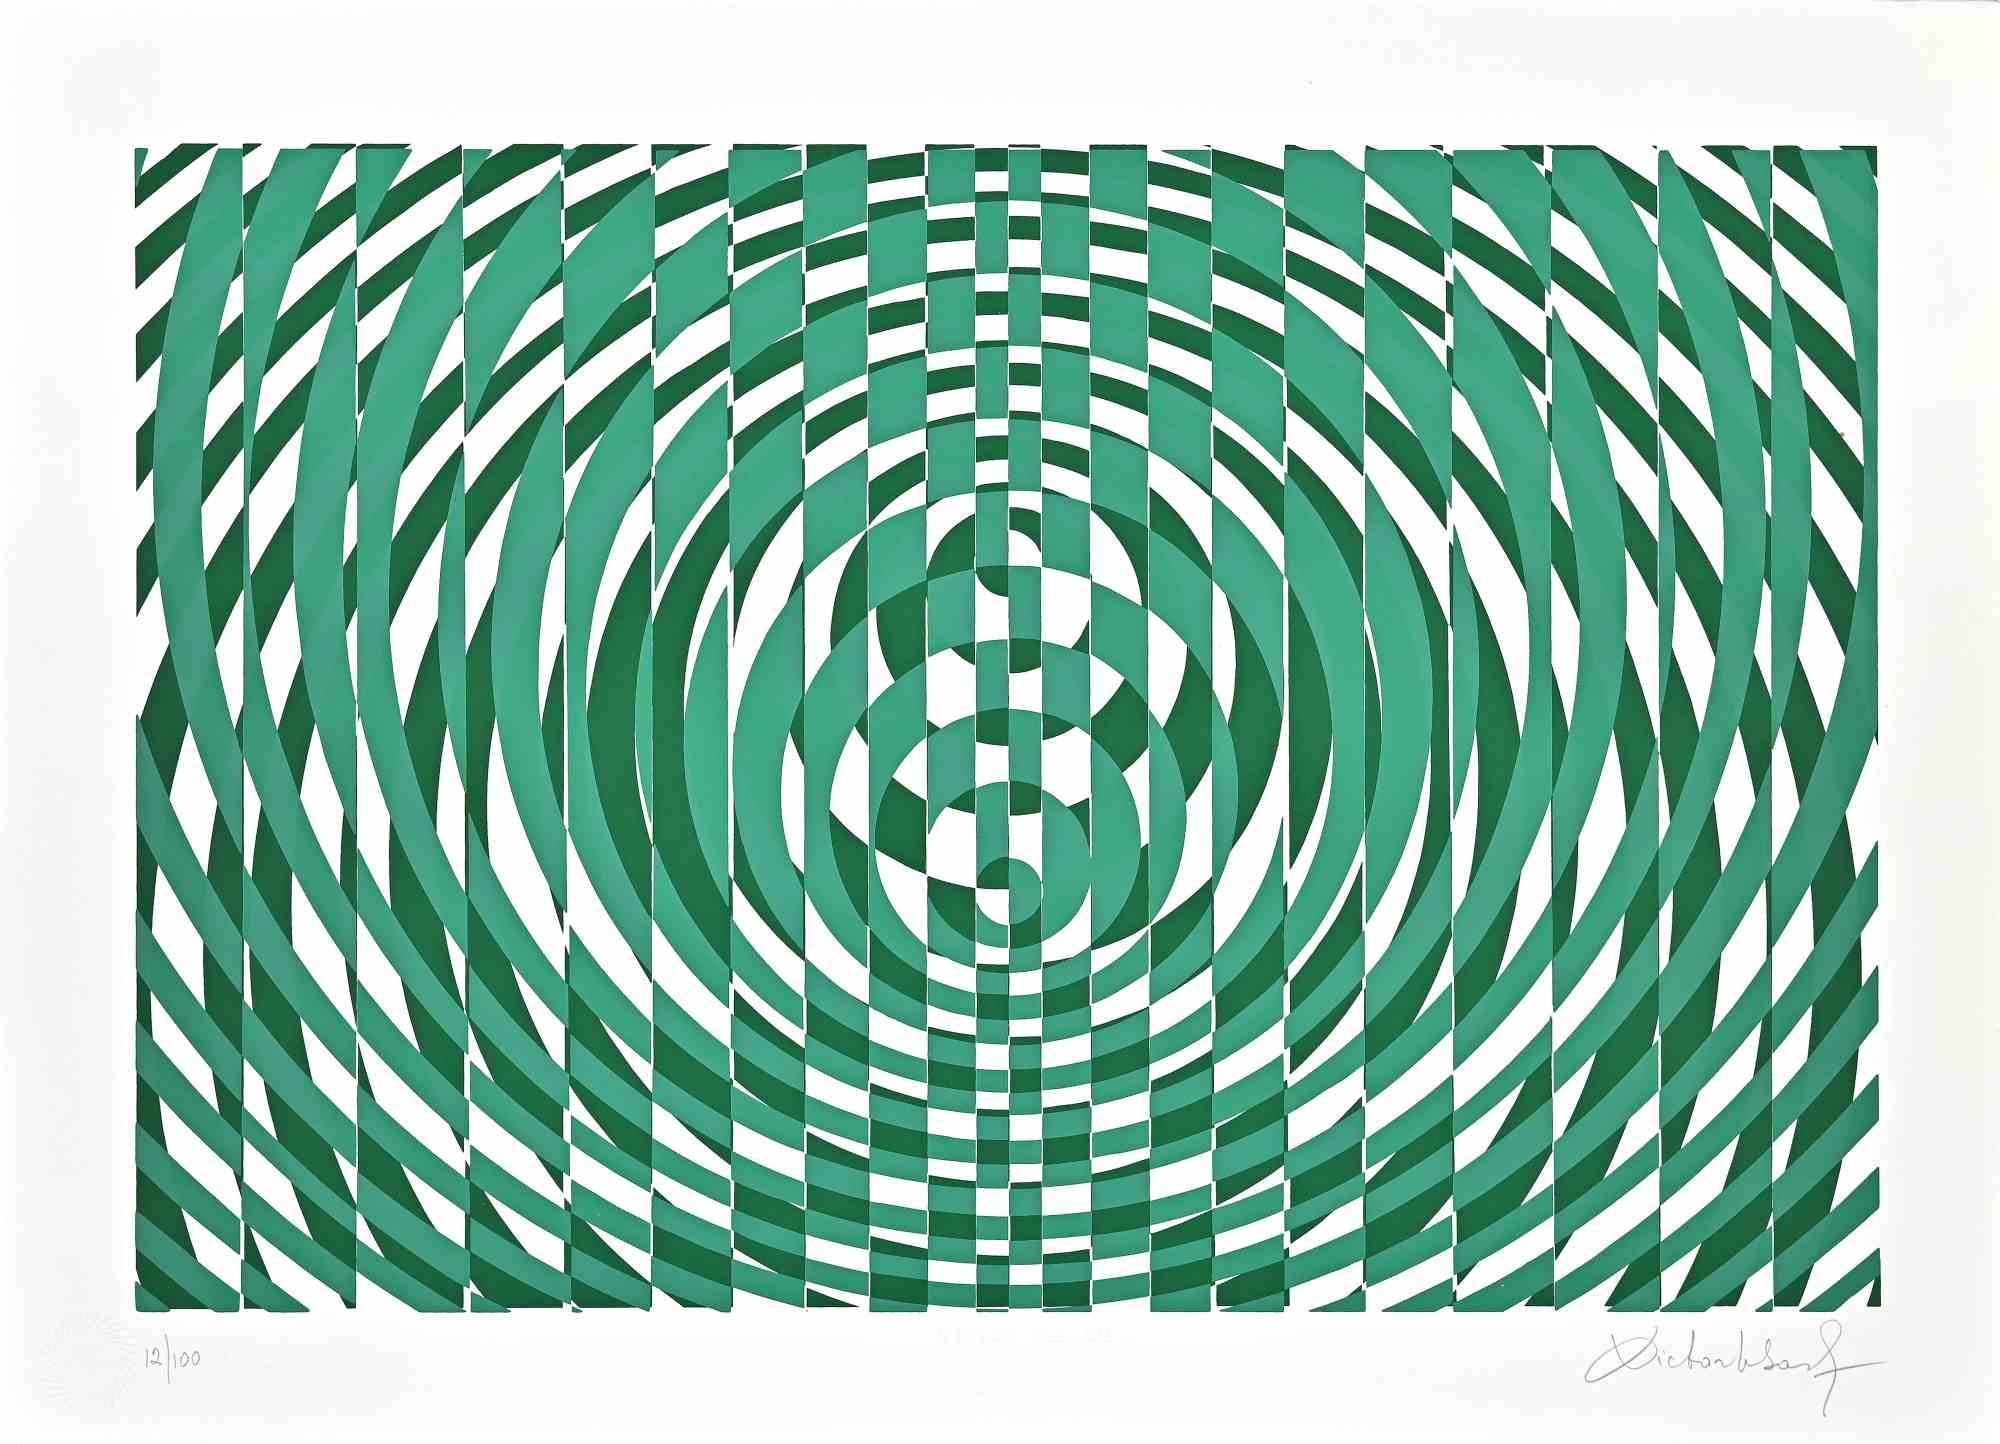 Abstract Green Composition is a Screen Print on Paper realized by Victor Debach in 1970s.

Limited edition of 100 copies numbered and signed by the artist with pencil on the lower margin. 

Edition 12/100

Good condition on white cardboard.